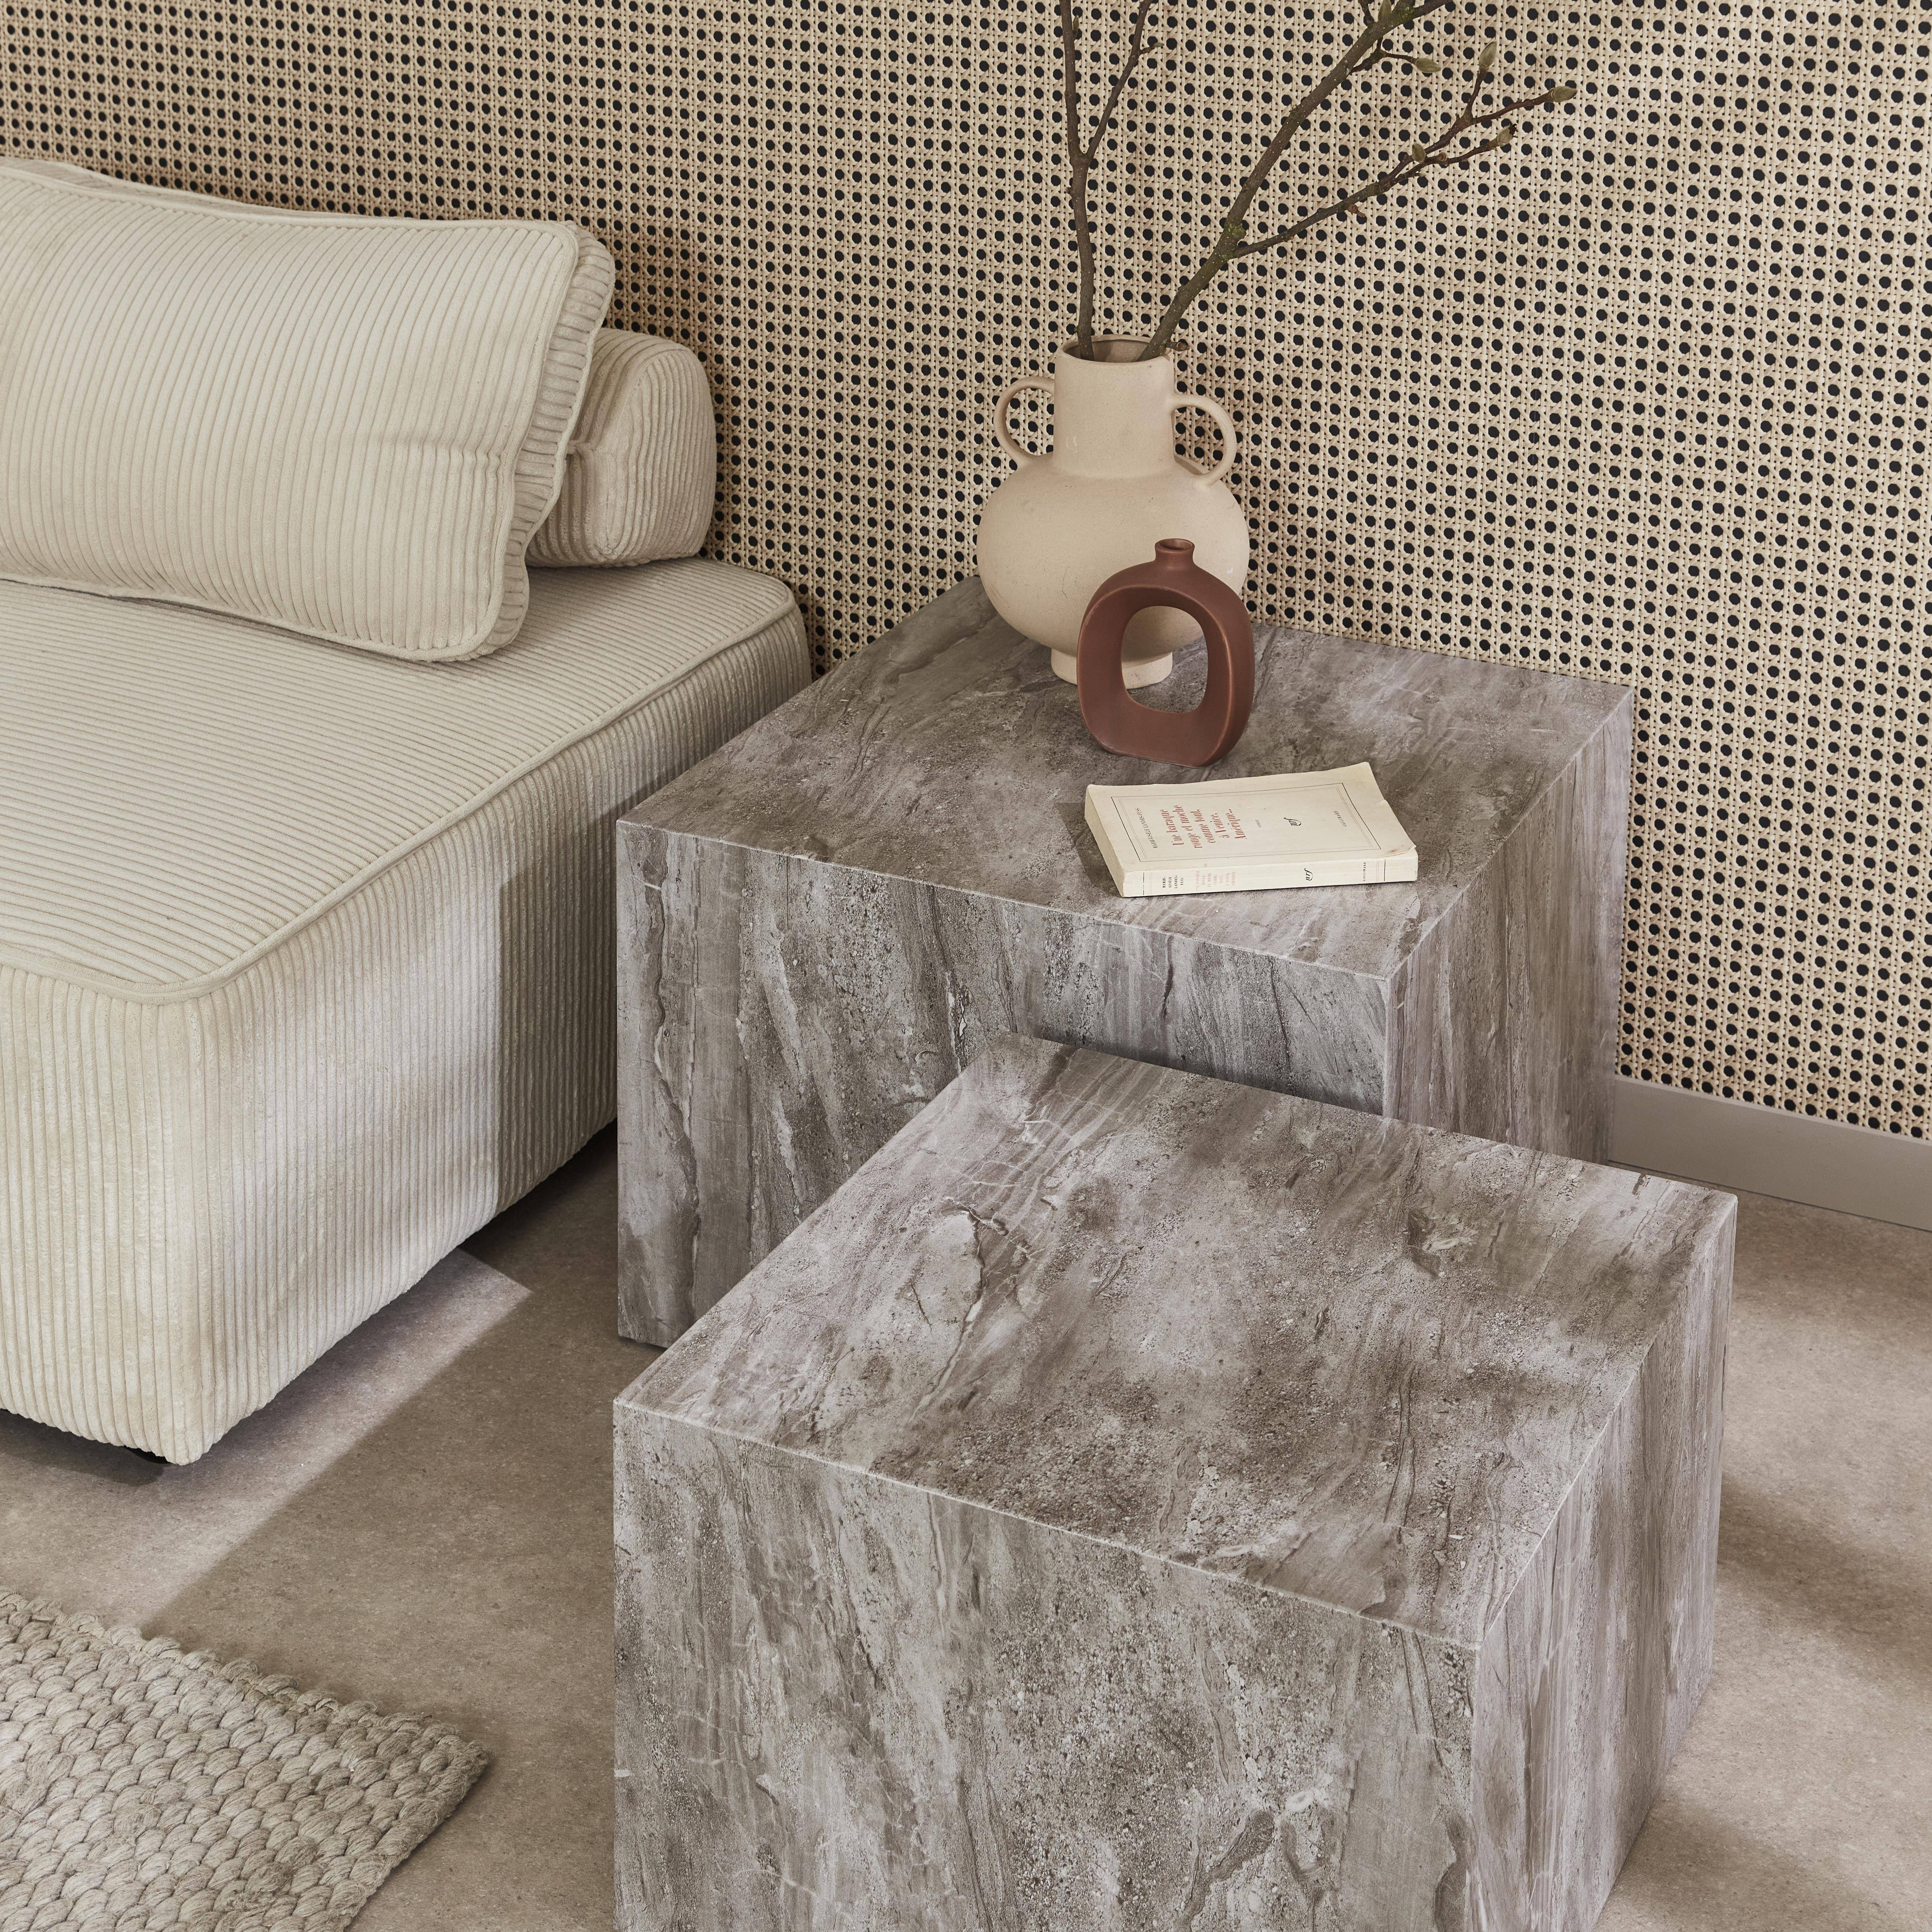 Set of 2 square coffee tables with marble effect, grey, L50xW50xH33cm &  L58xW58xH40cm, Paros,sweeek,Photo2